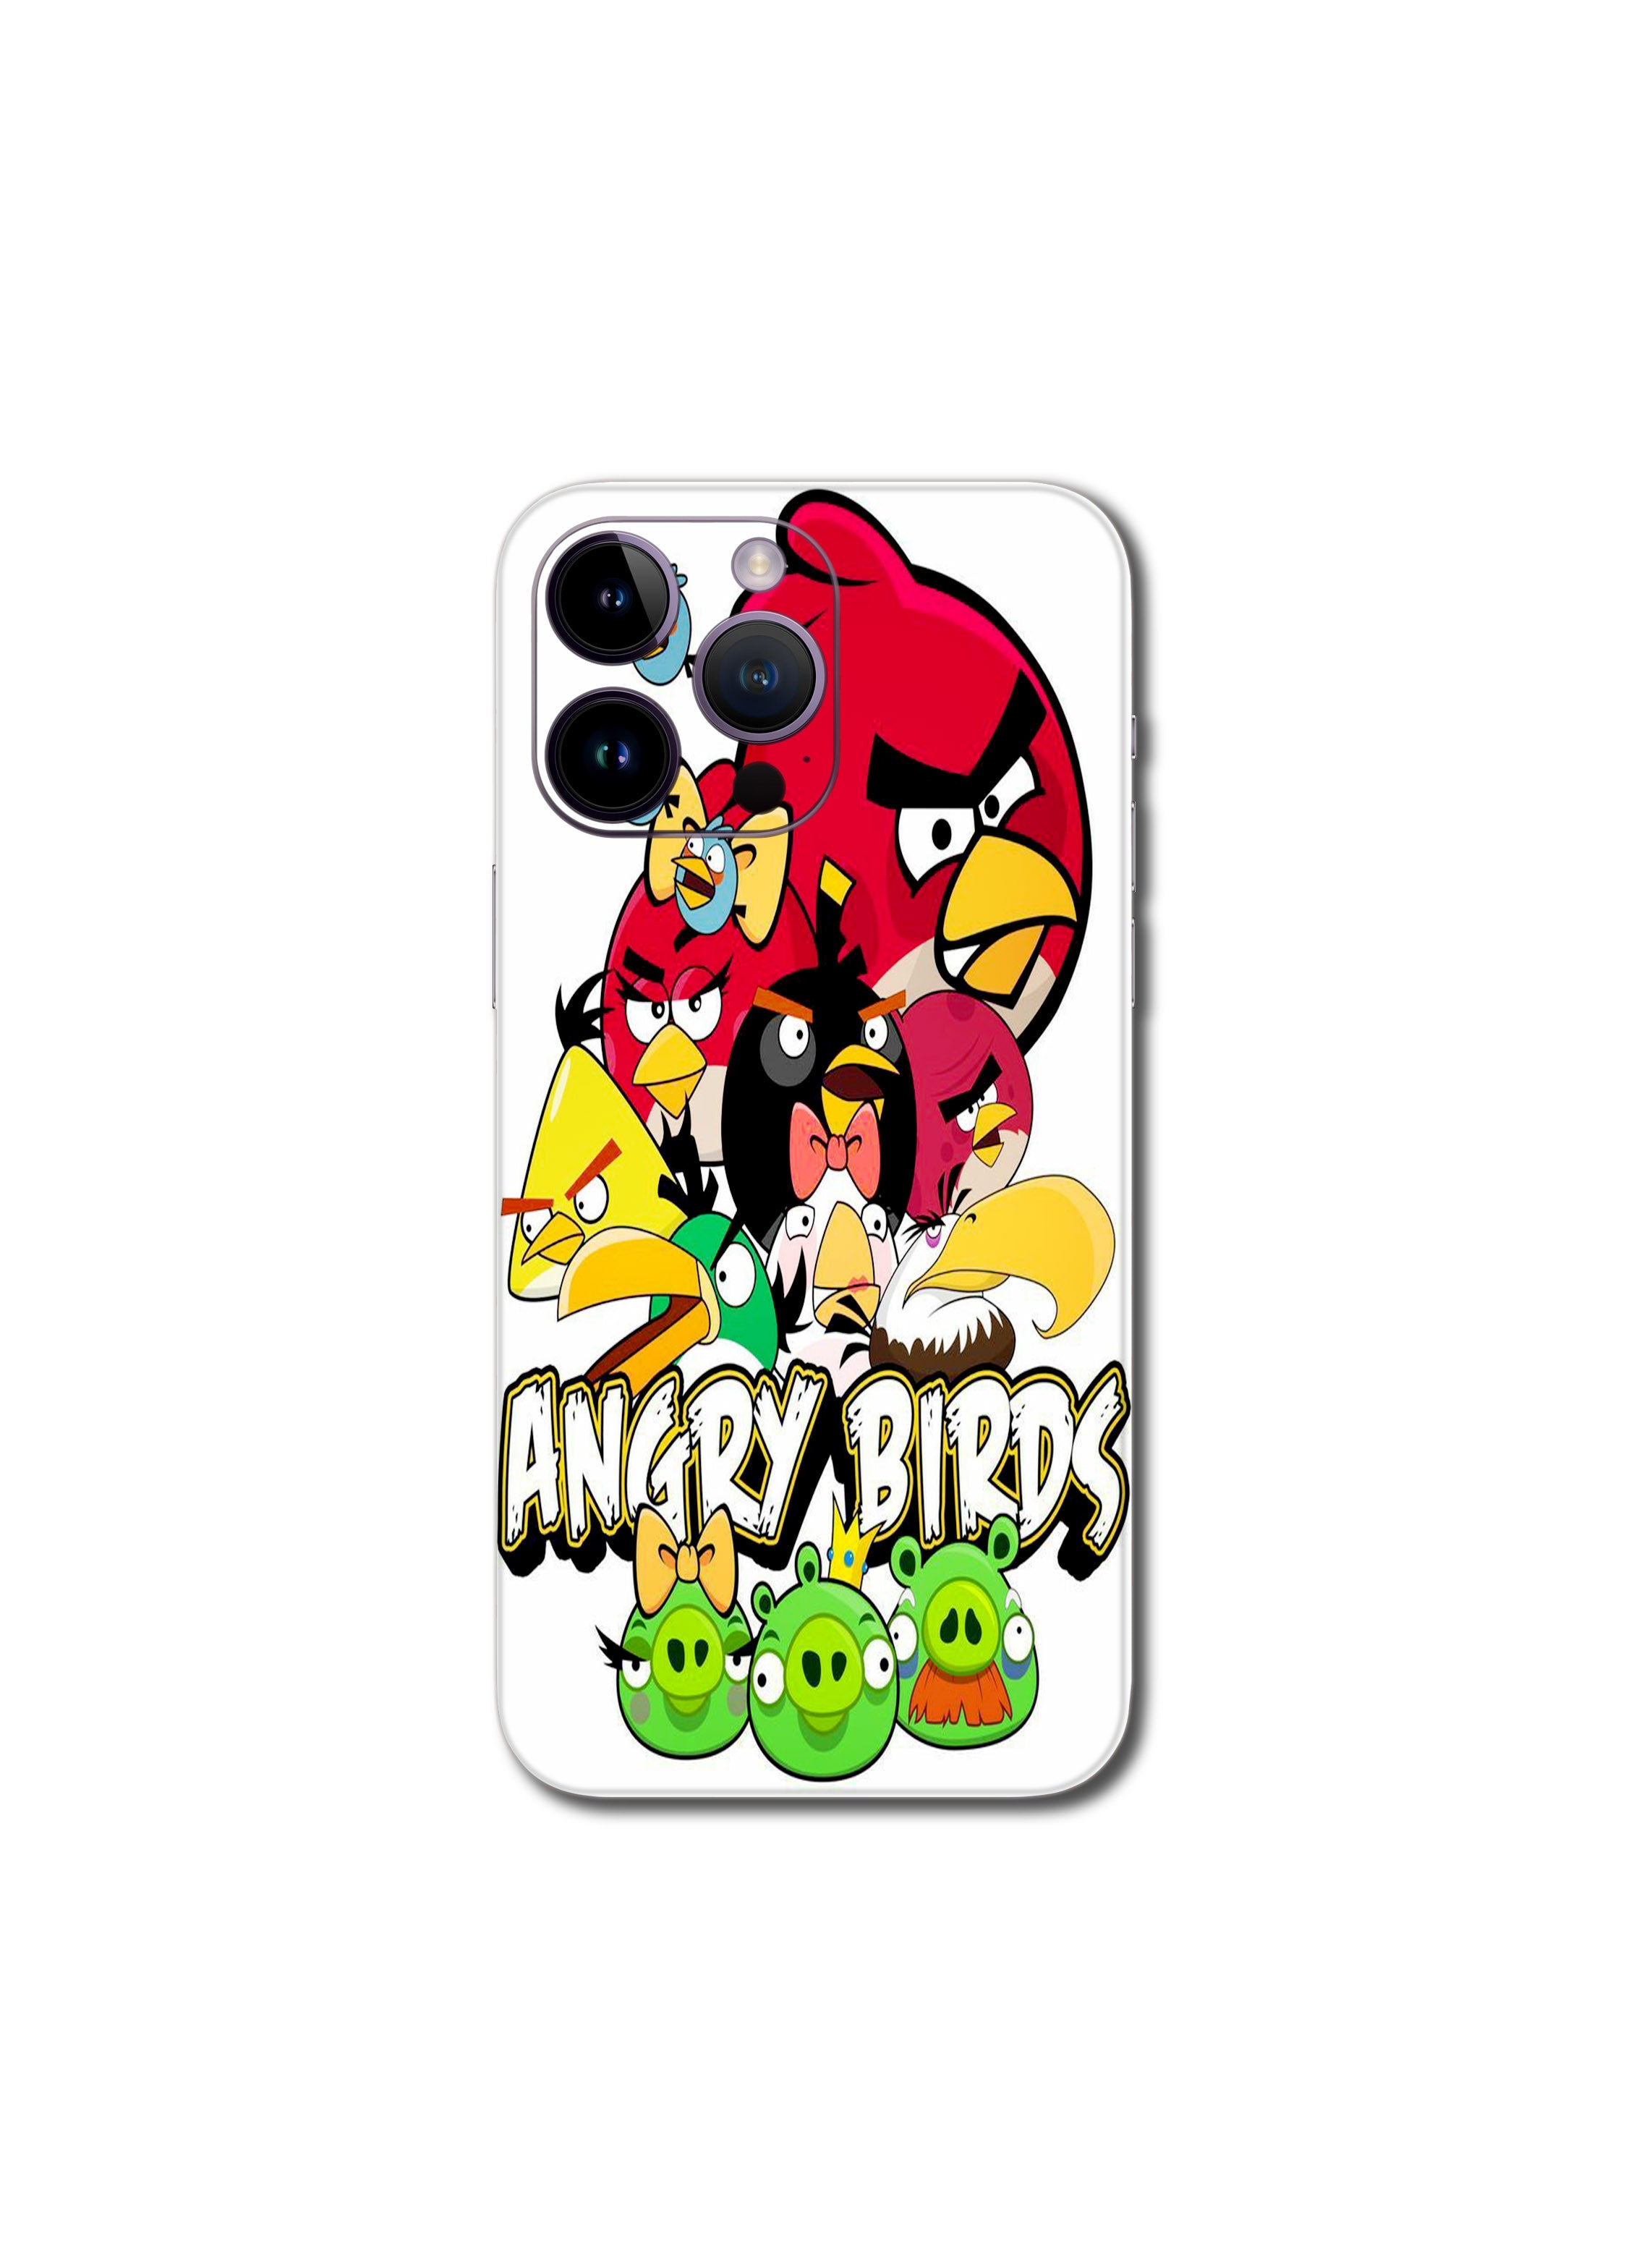 Angry birds (379)